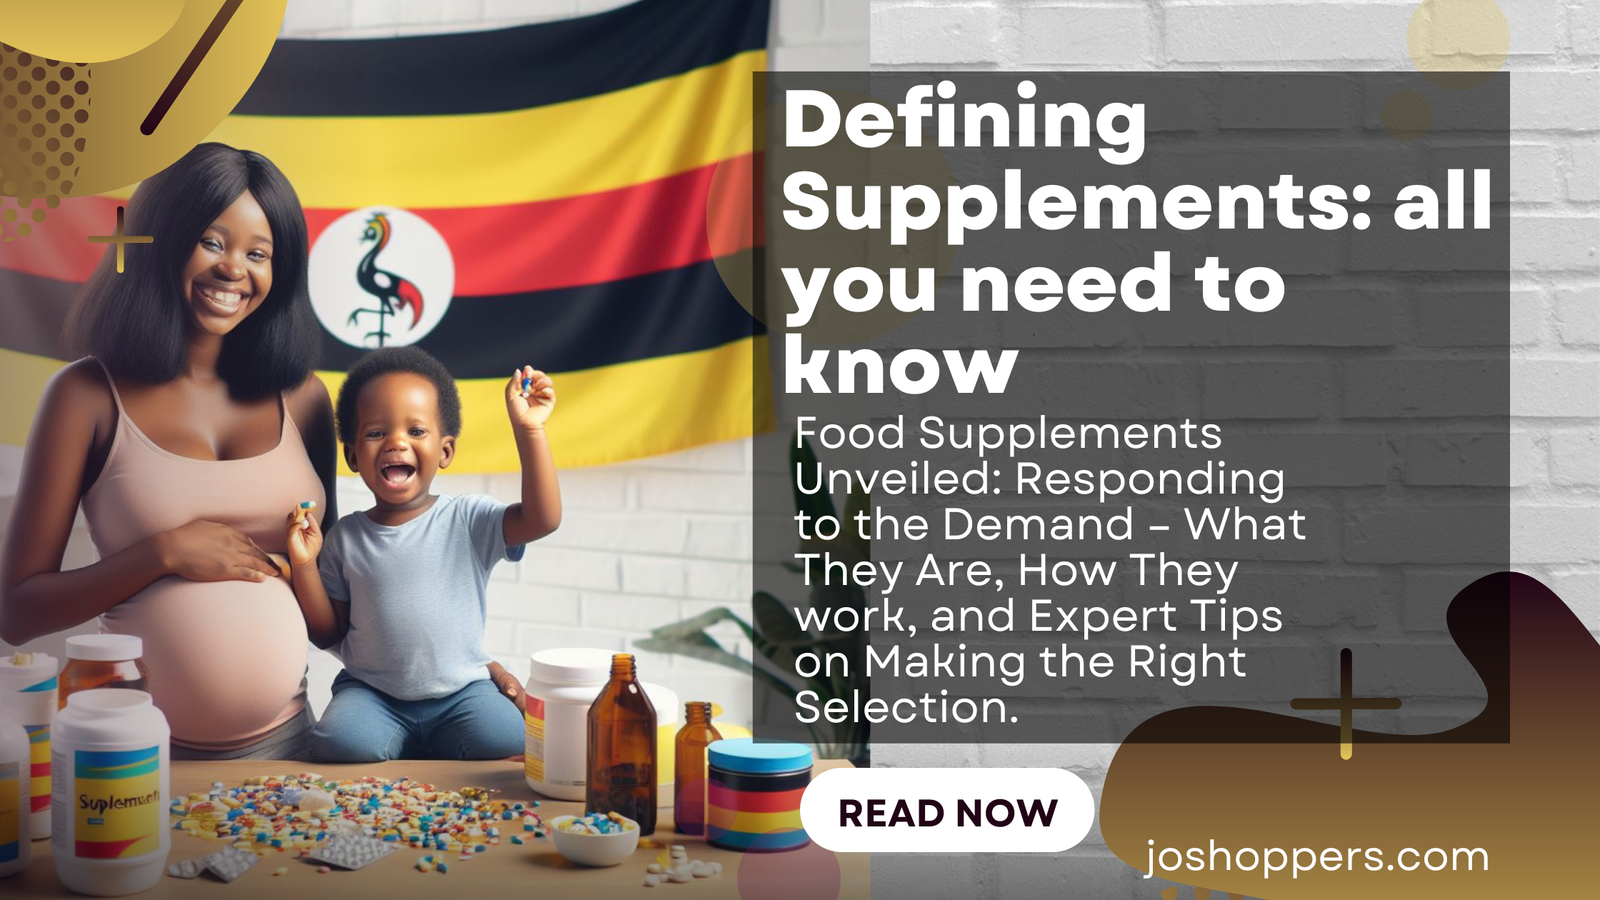 Supplements in Uganda: Choosing Wisely to Boost Health & Nourish the Nation